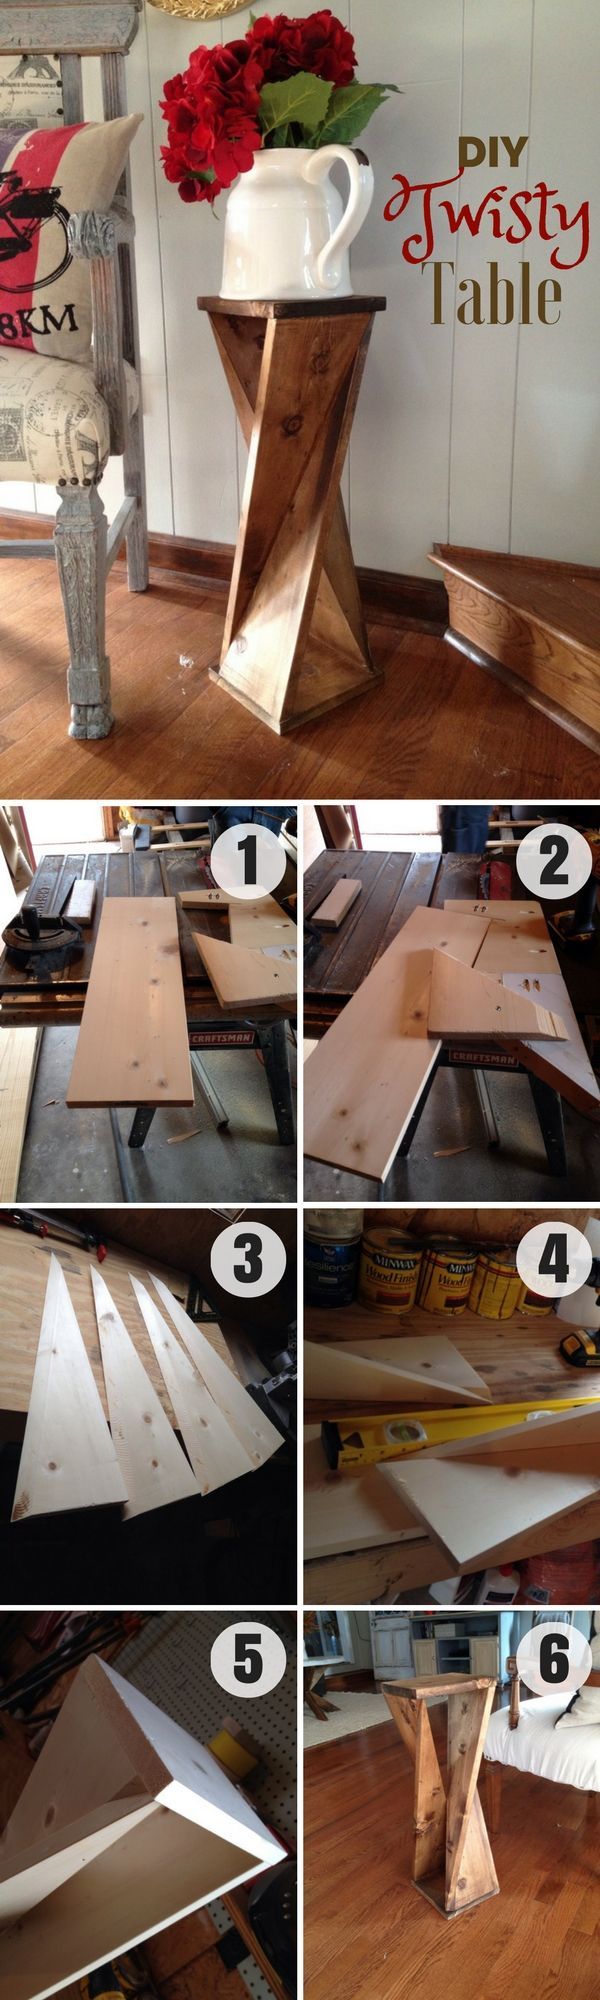 Check out how to make this easy DIY Twisty Table @Industry Standard Design